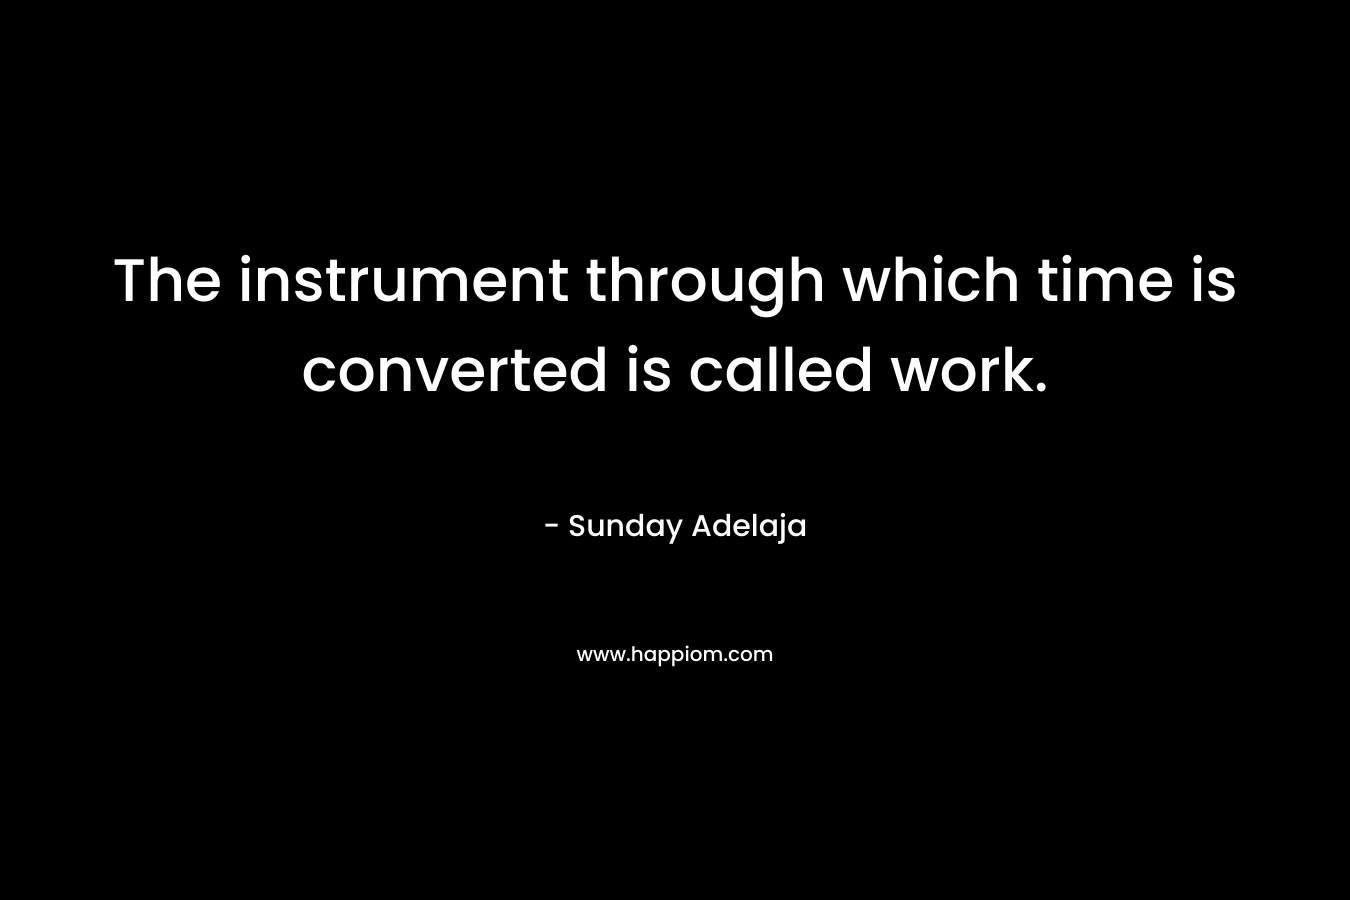 The instrument through which time is converted is called work.